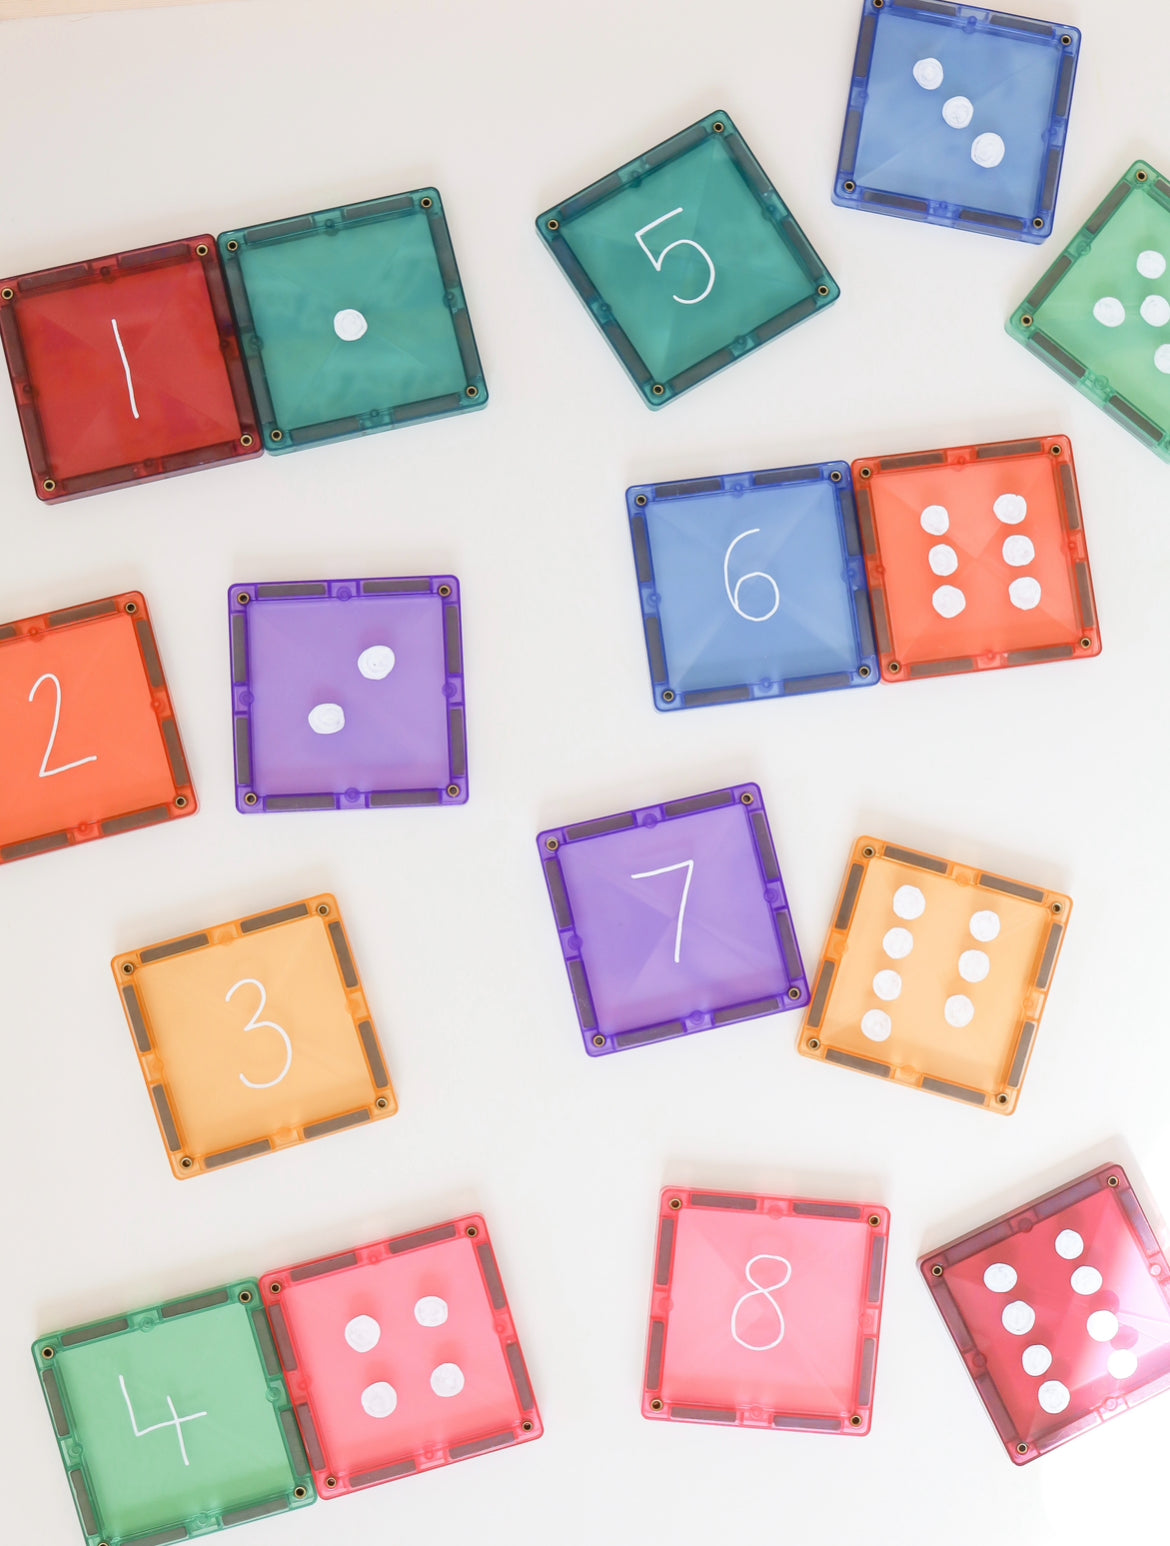 5 Toys to Combine with Magnetic Tiles